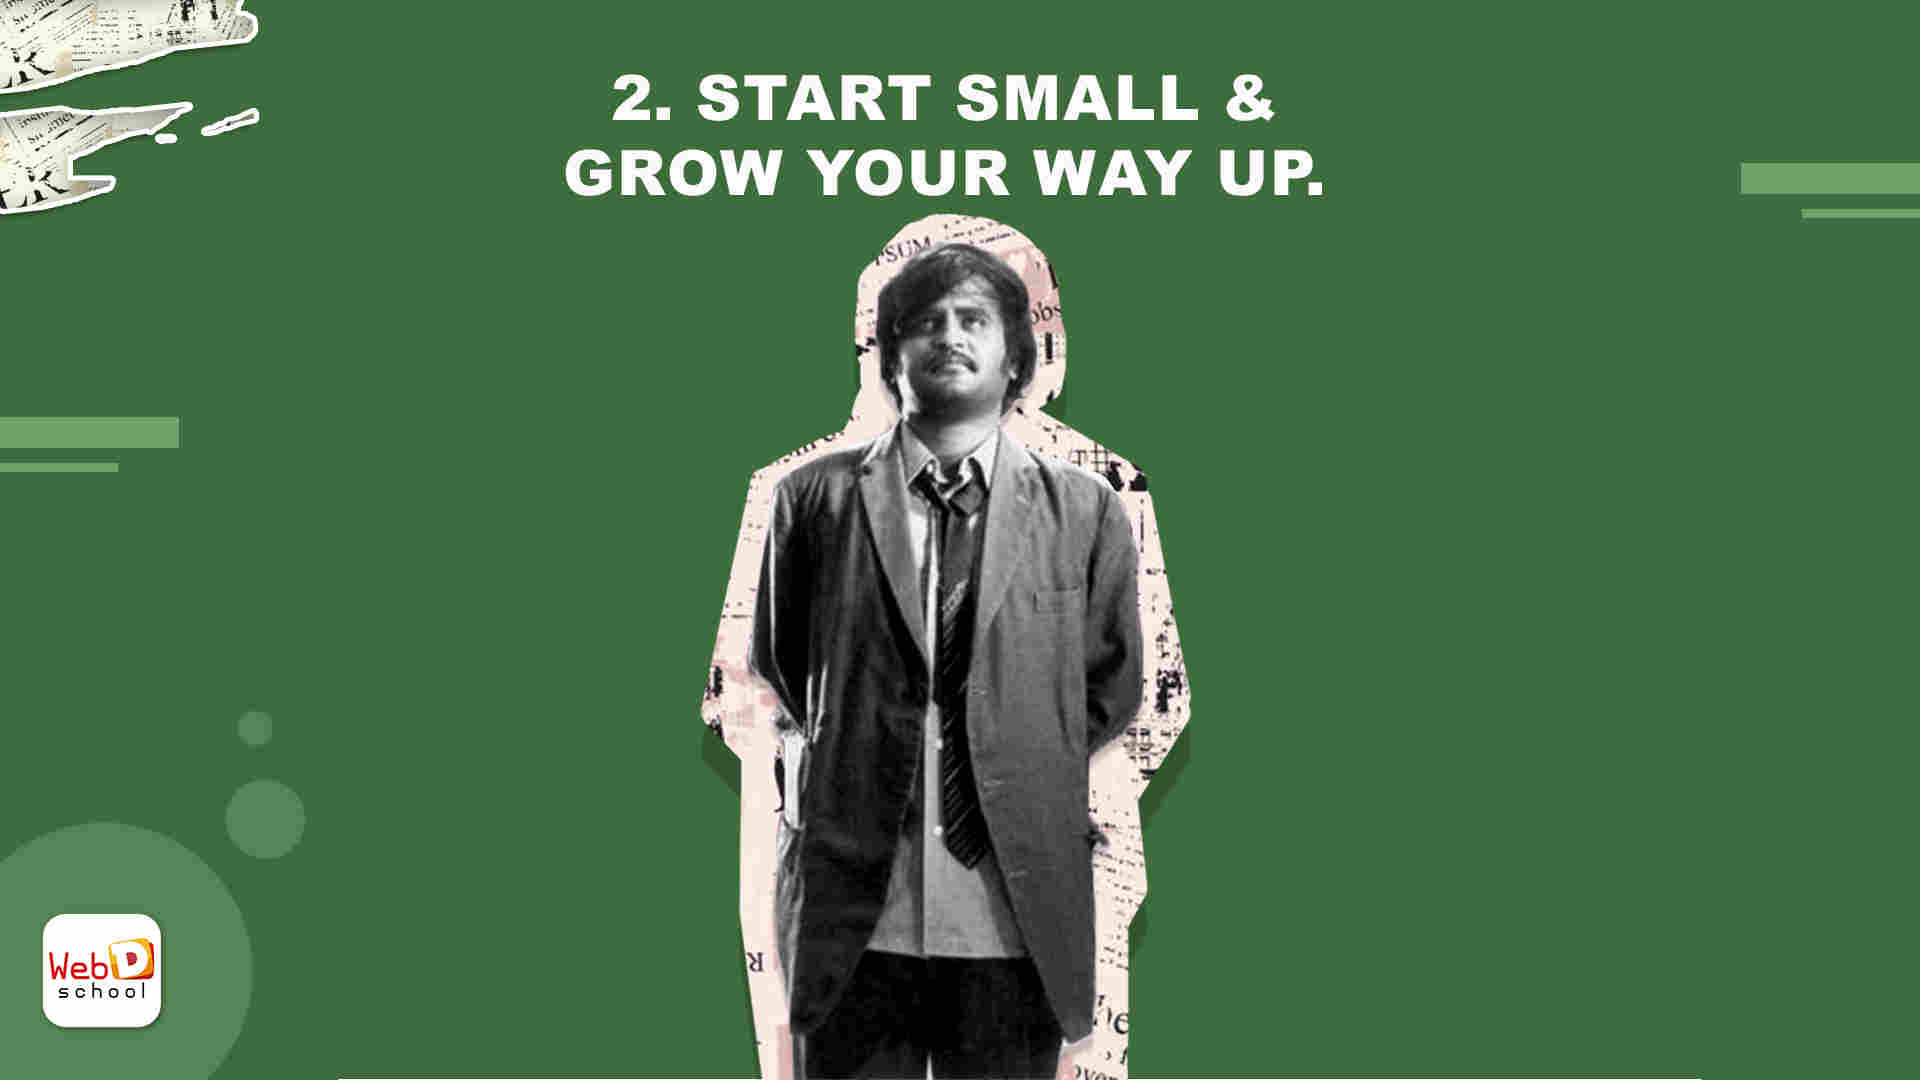 Start Small & Grow your Way Up.